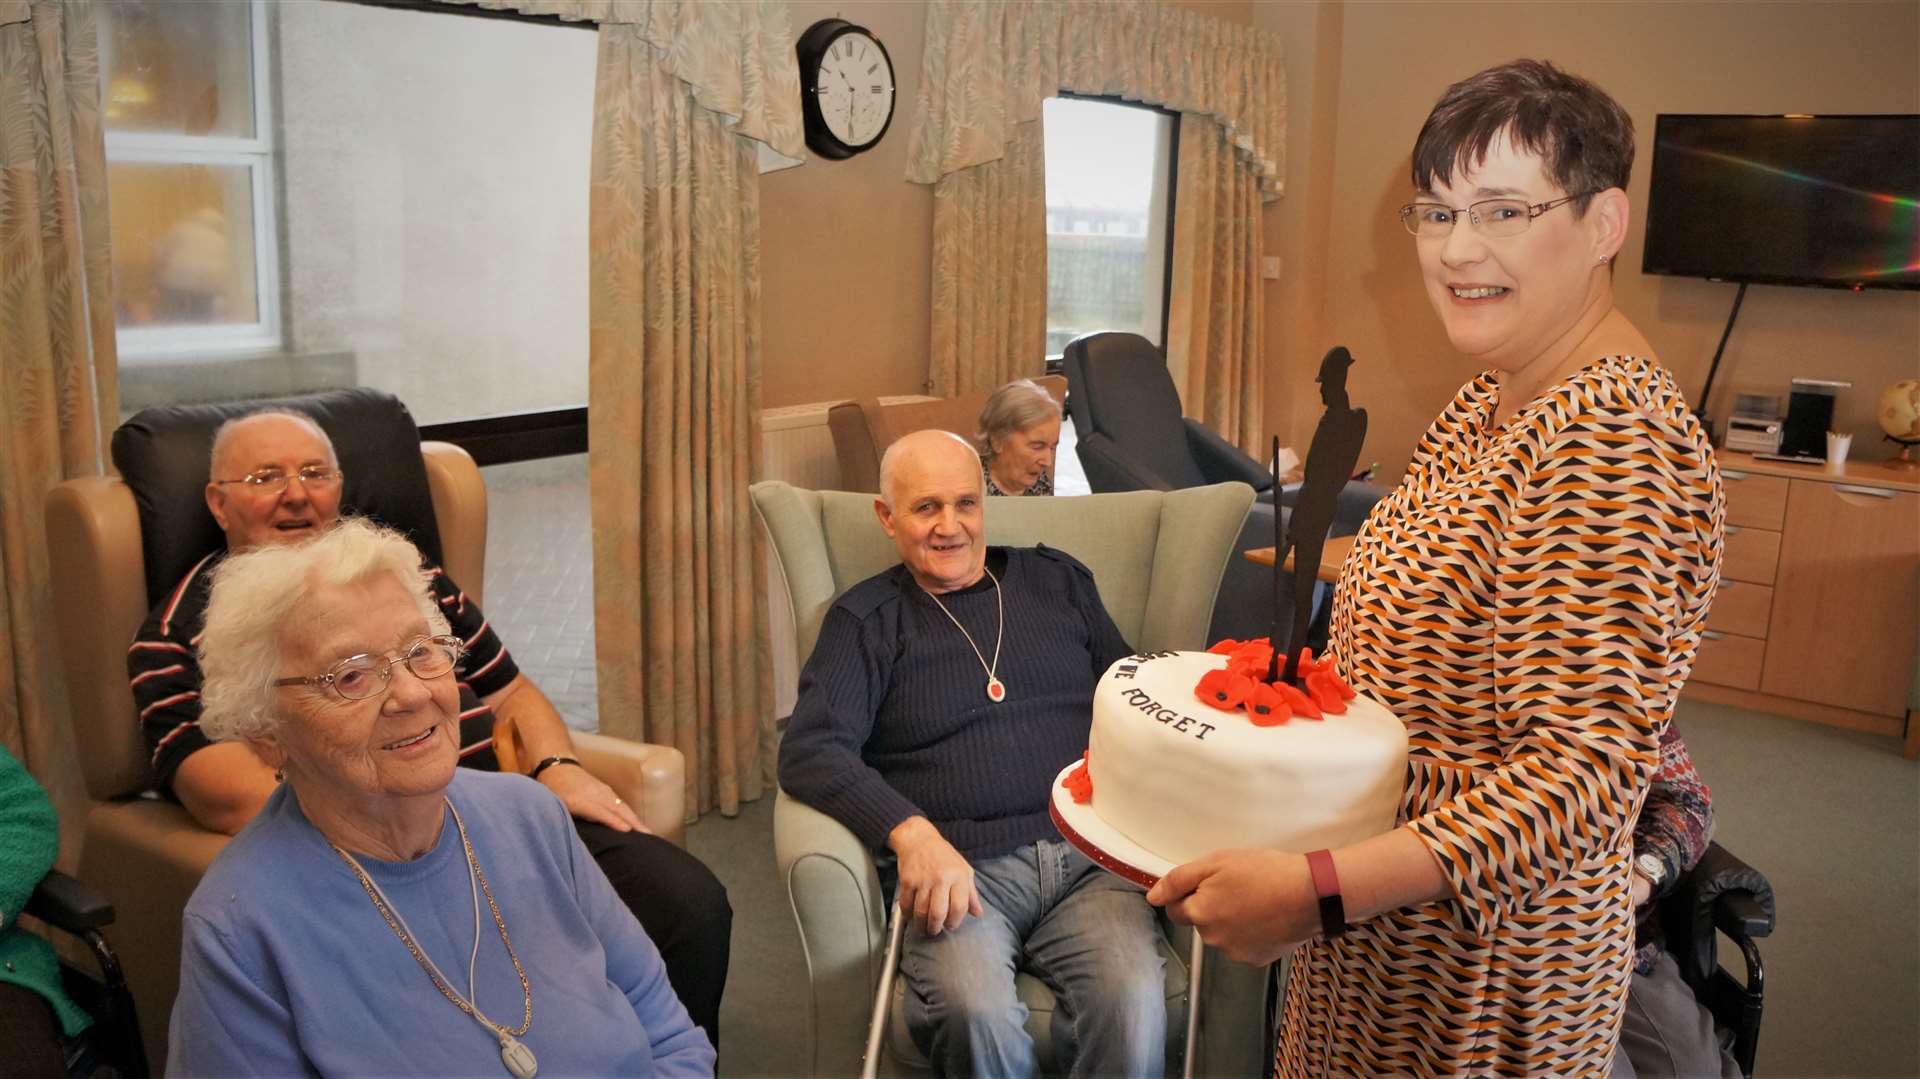 Anne Campbell with the cake she handed over to the residents of Pulteney House on Armistice Day.